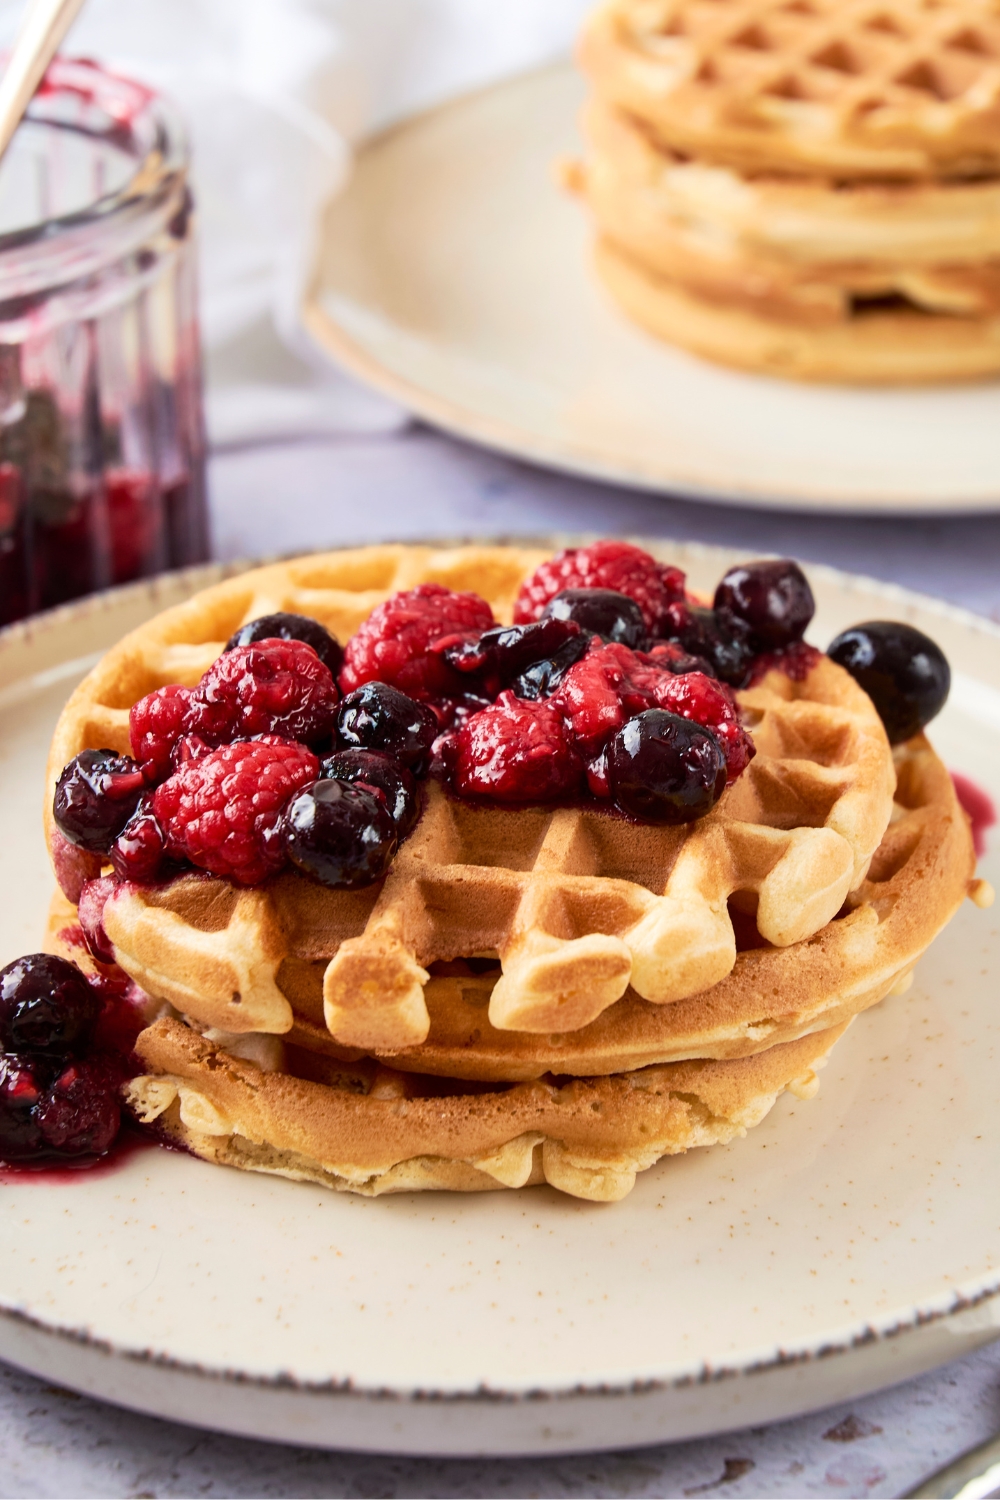 A stack of waffle house waffles sits on a plate. The waffles are topped with fresh berries.